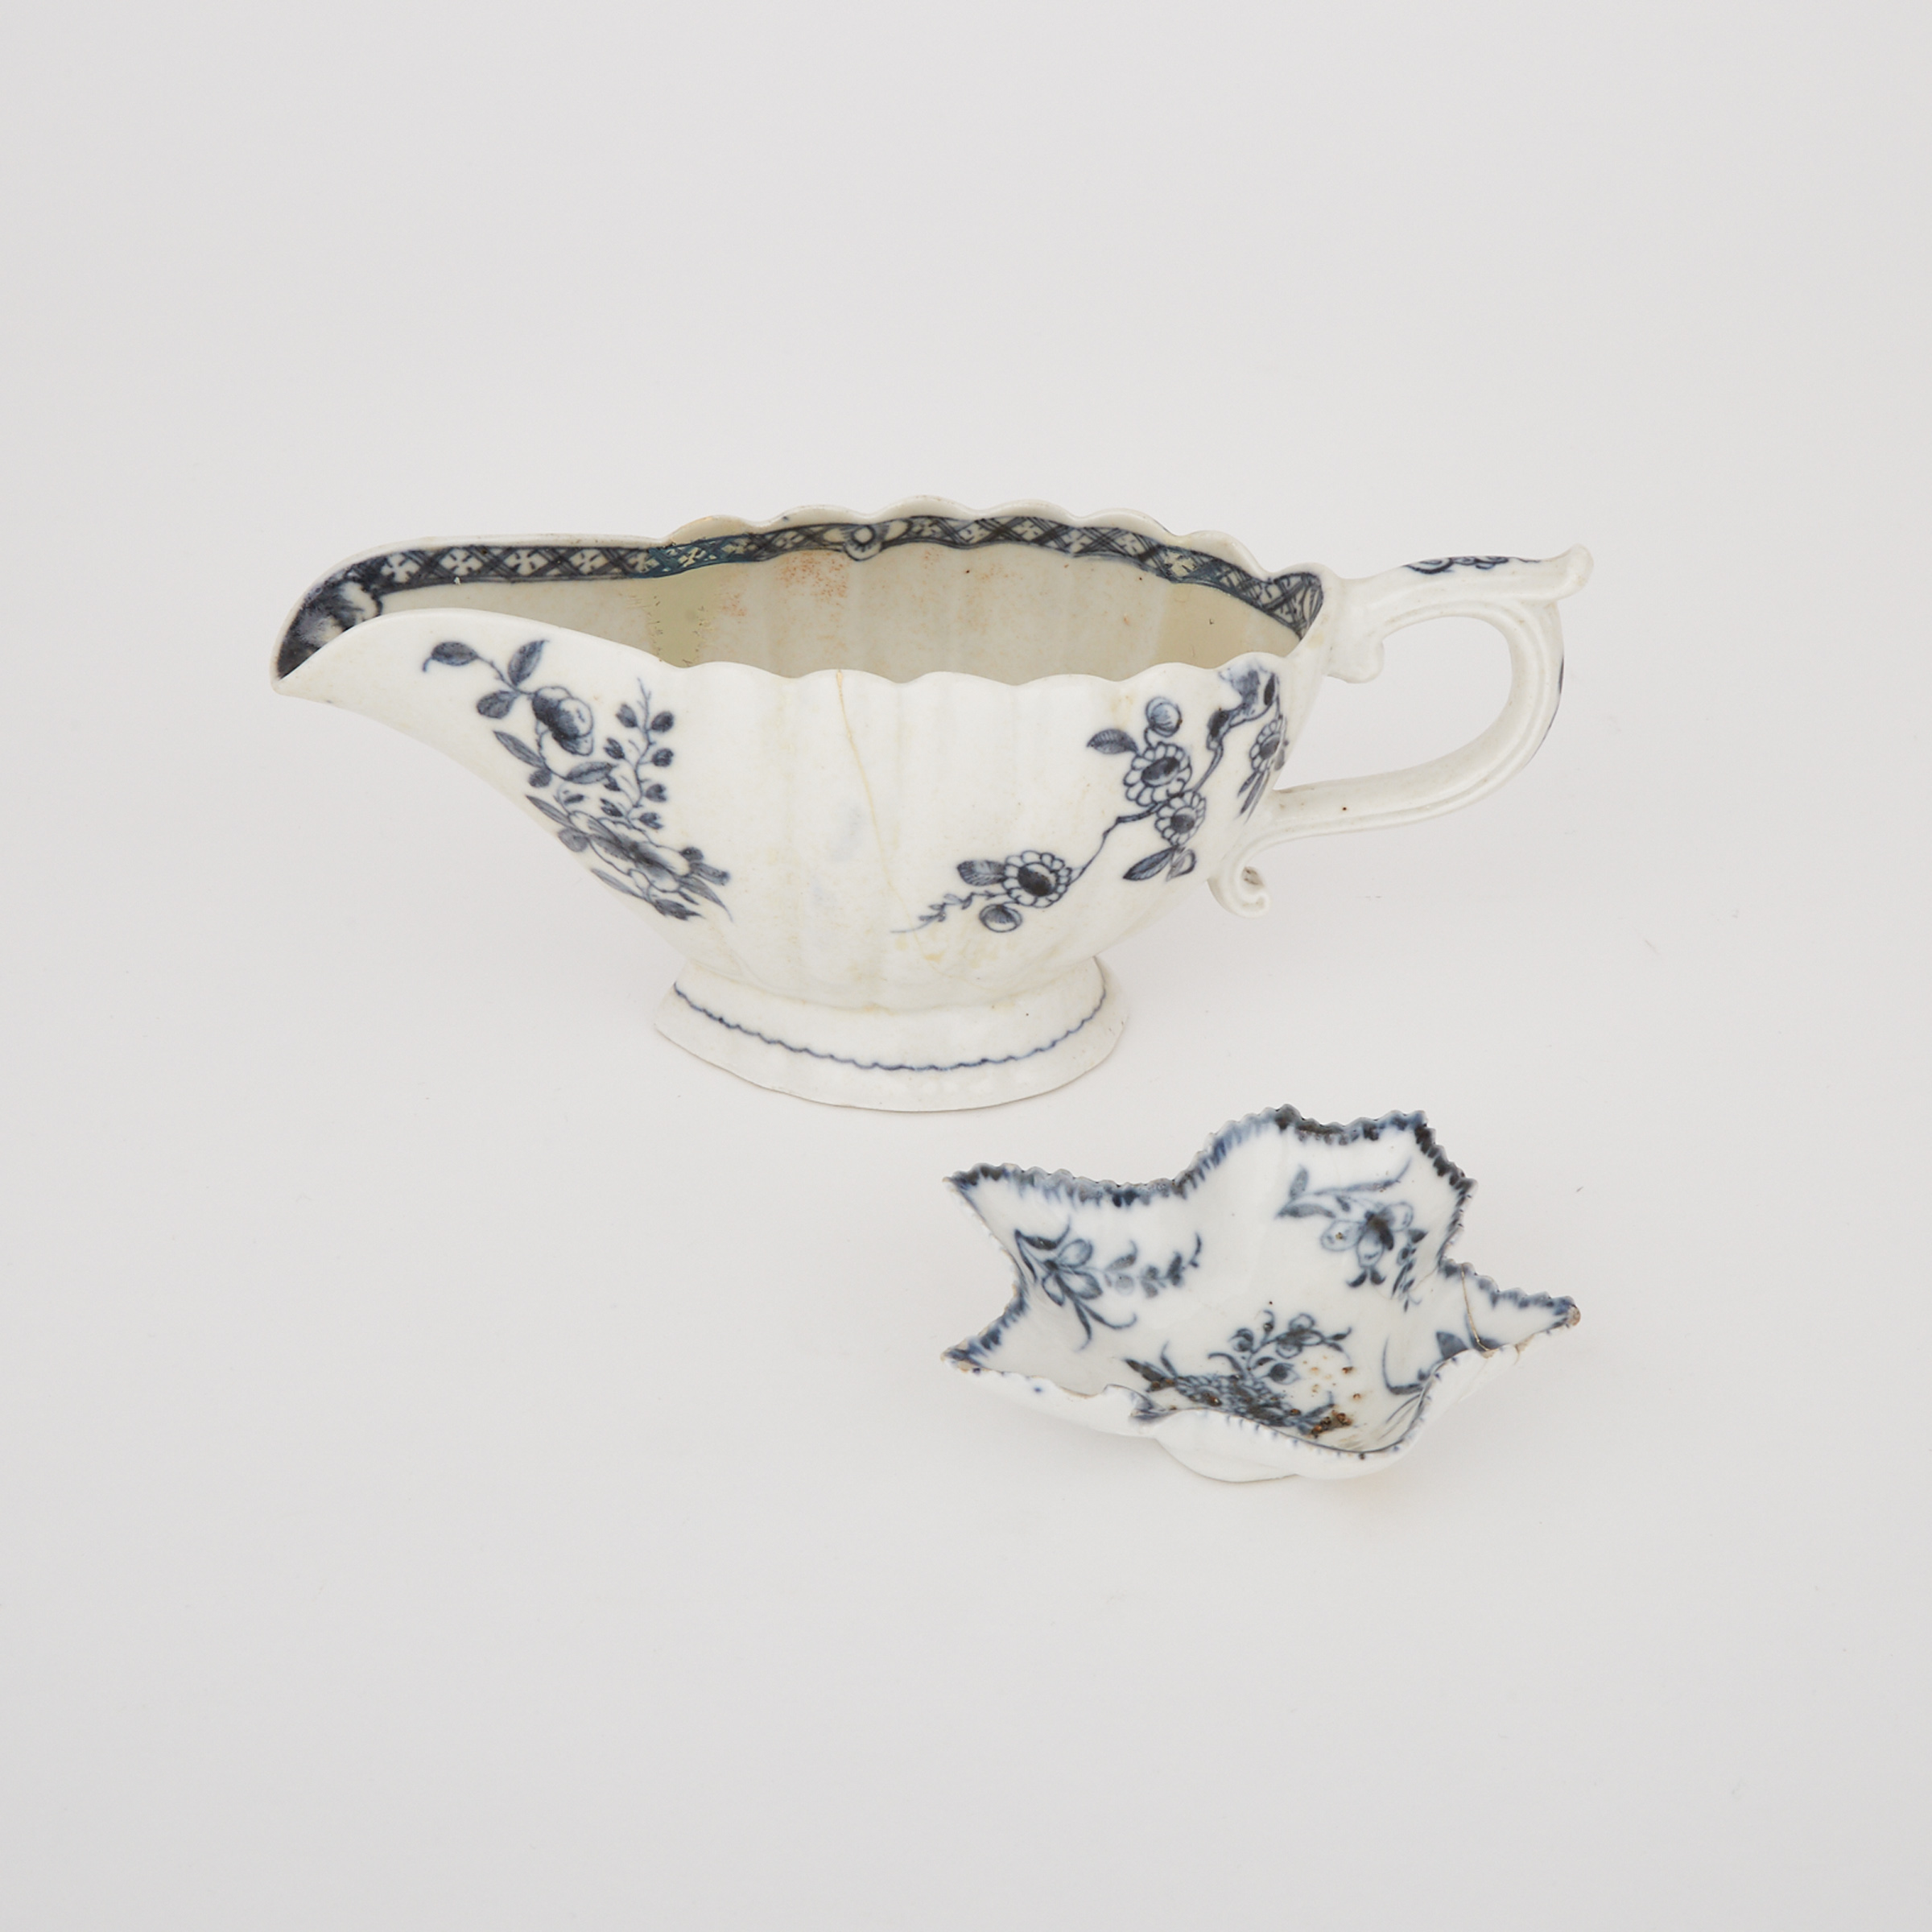 Plymouth Blue Painted Sauce Boat and Pickle Leaf Dish, c.1768-70